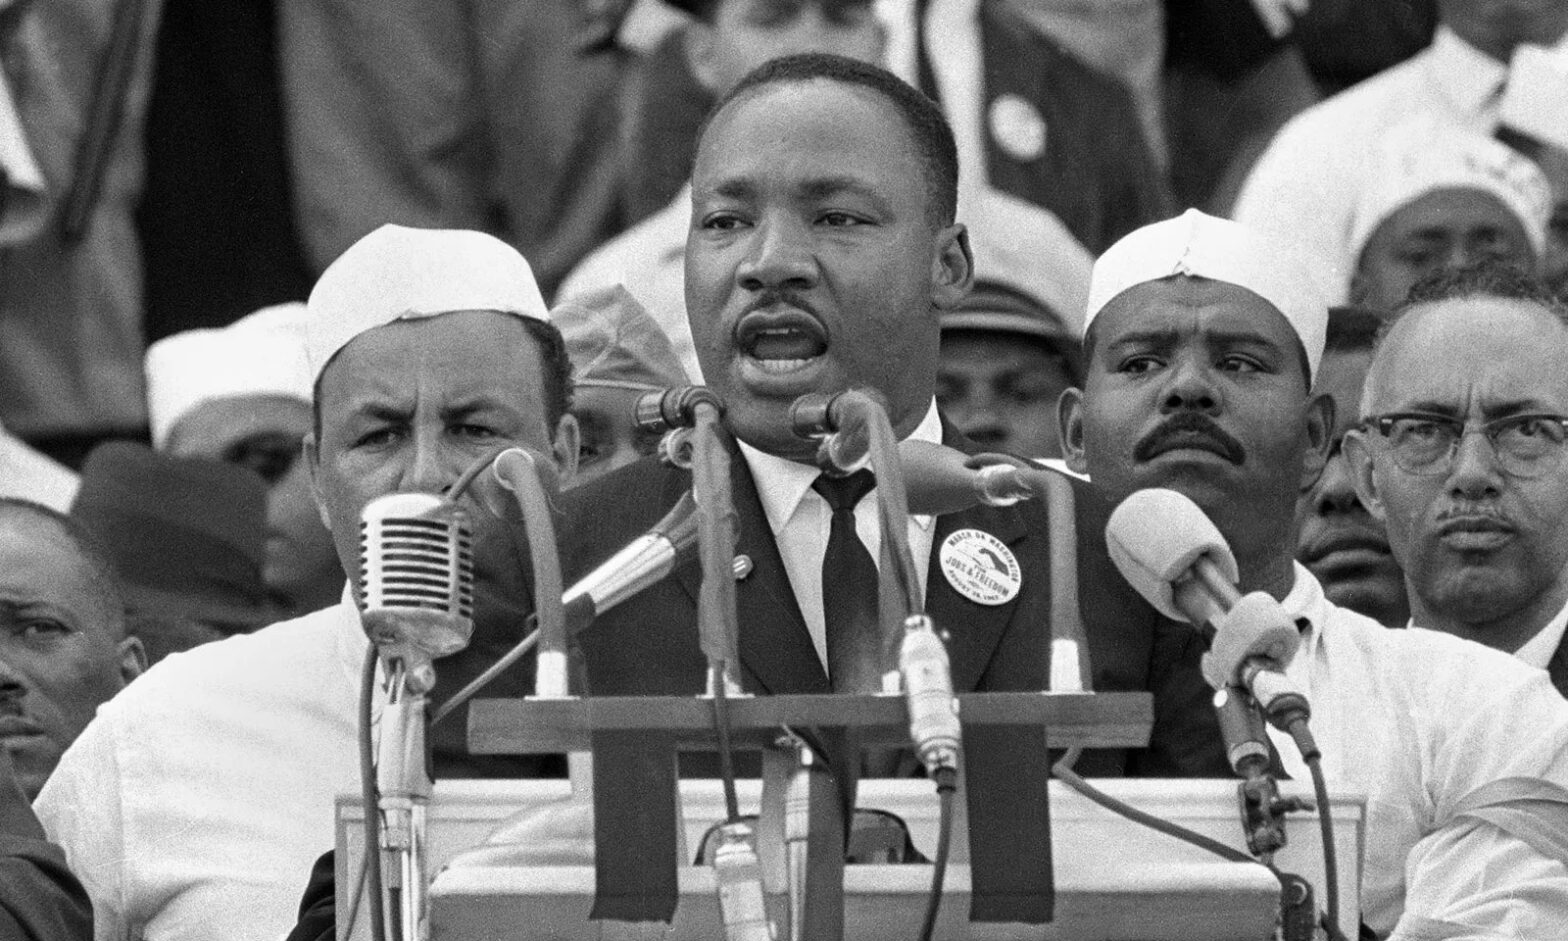 Martin Luther King, Jr. delivering his "I Have a Dream" speech